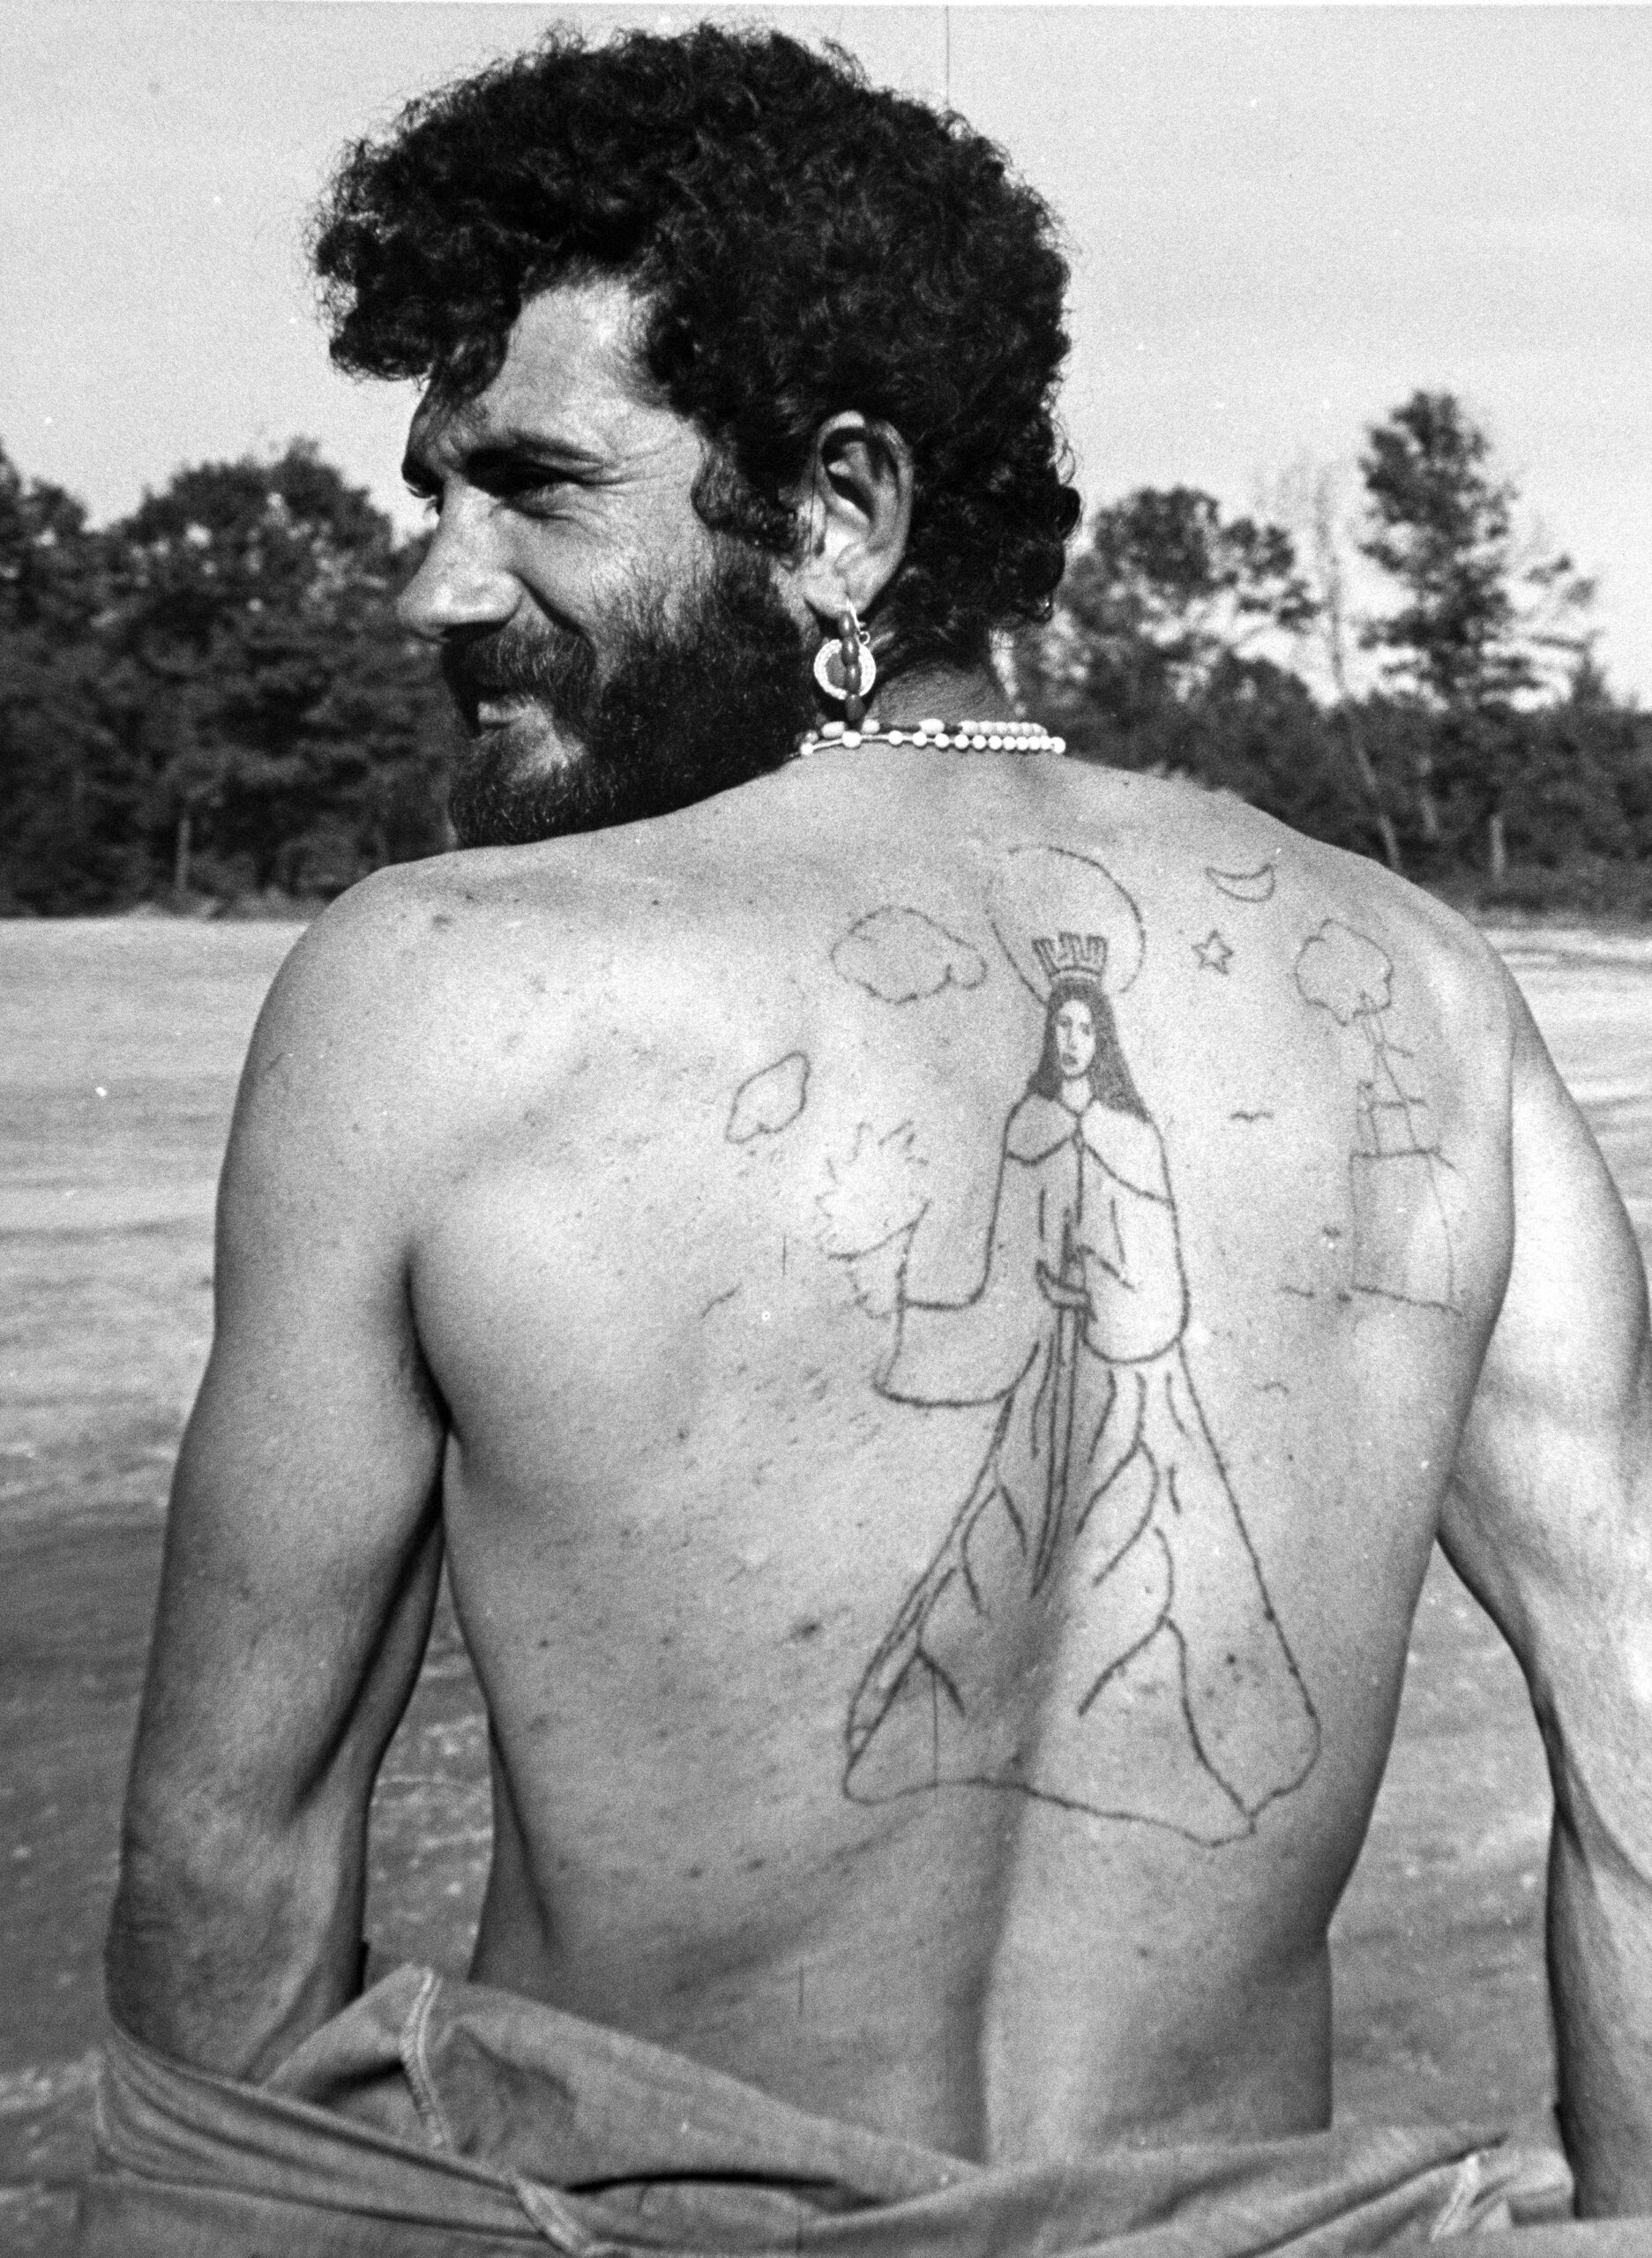 A Cuban refugees shows his back with a tattoo of Saint Barbara